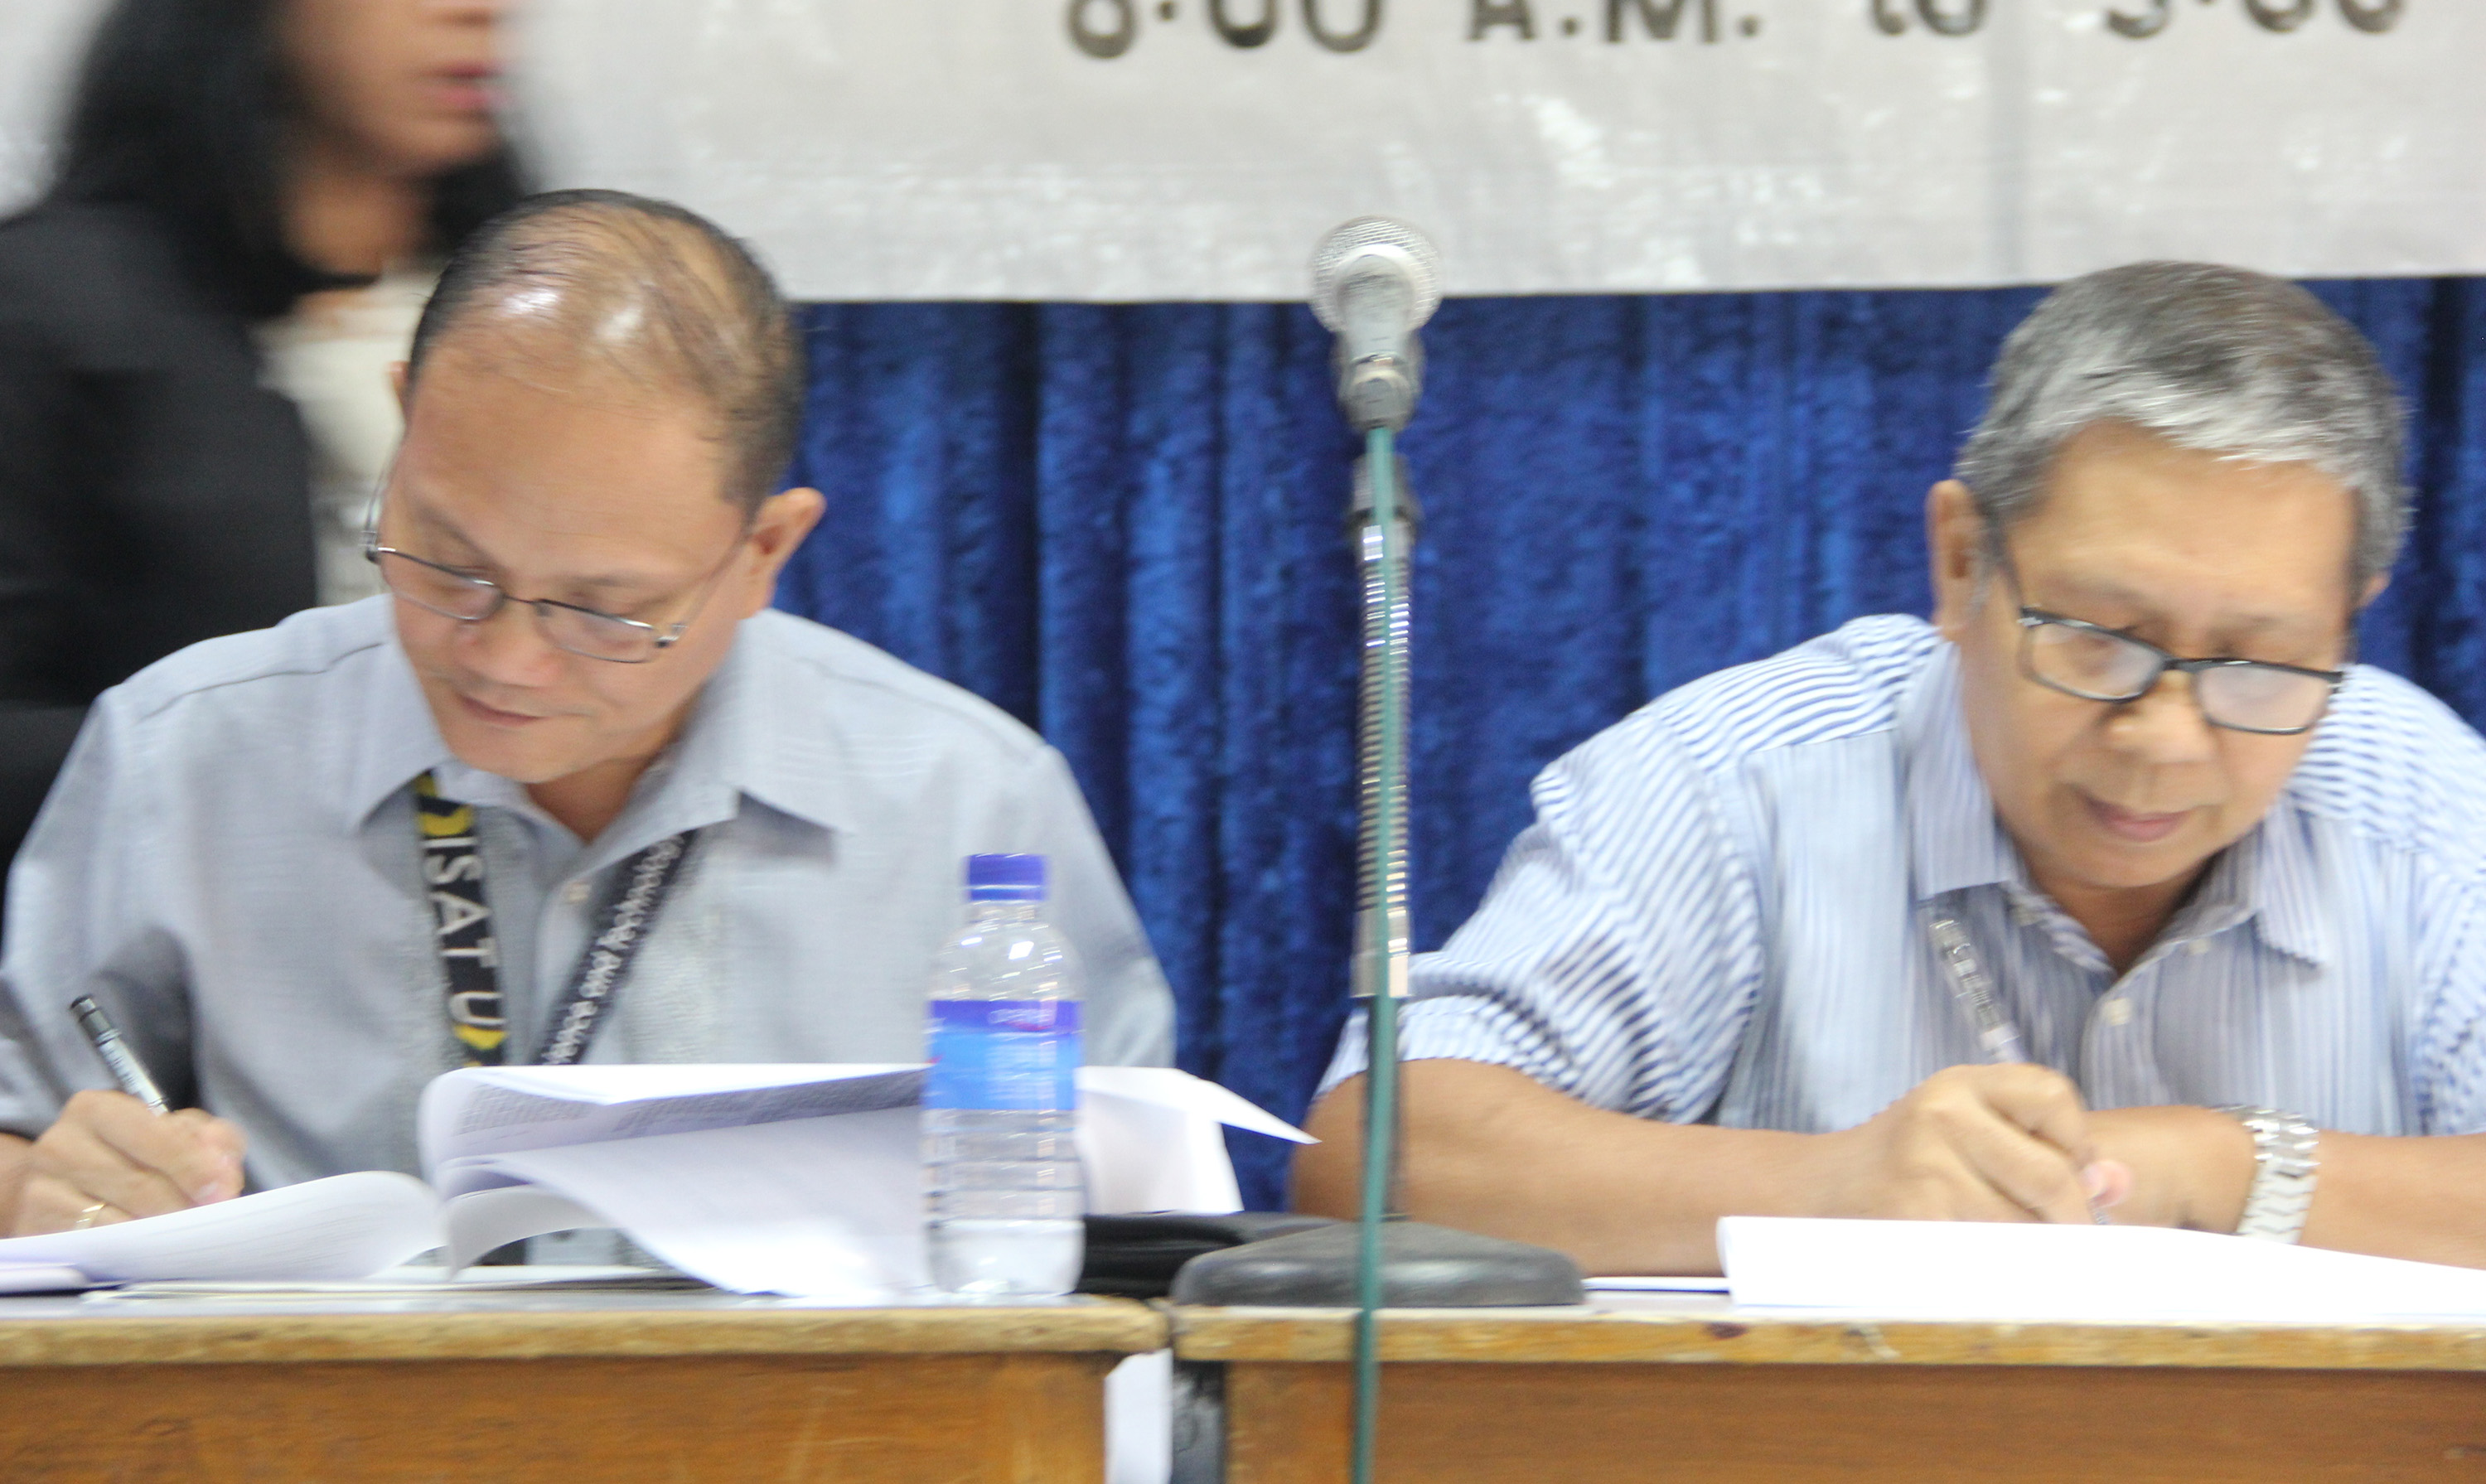 Dr. Raul F. Muyong and Engr. Jonathan Antiqueira signs the CNA.